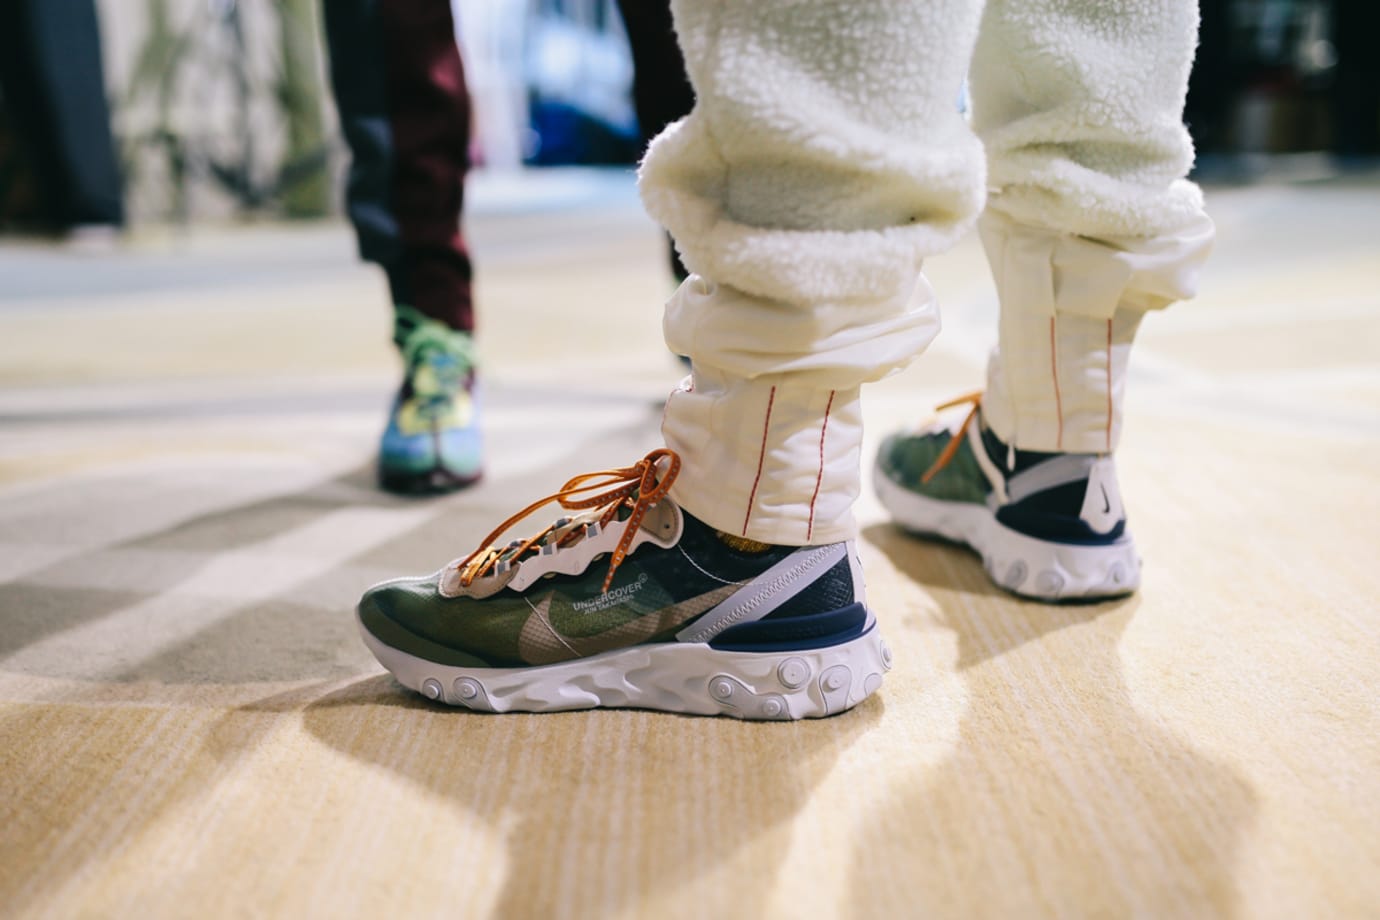 undercover x nike upcoming react element 87